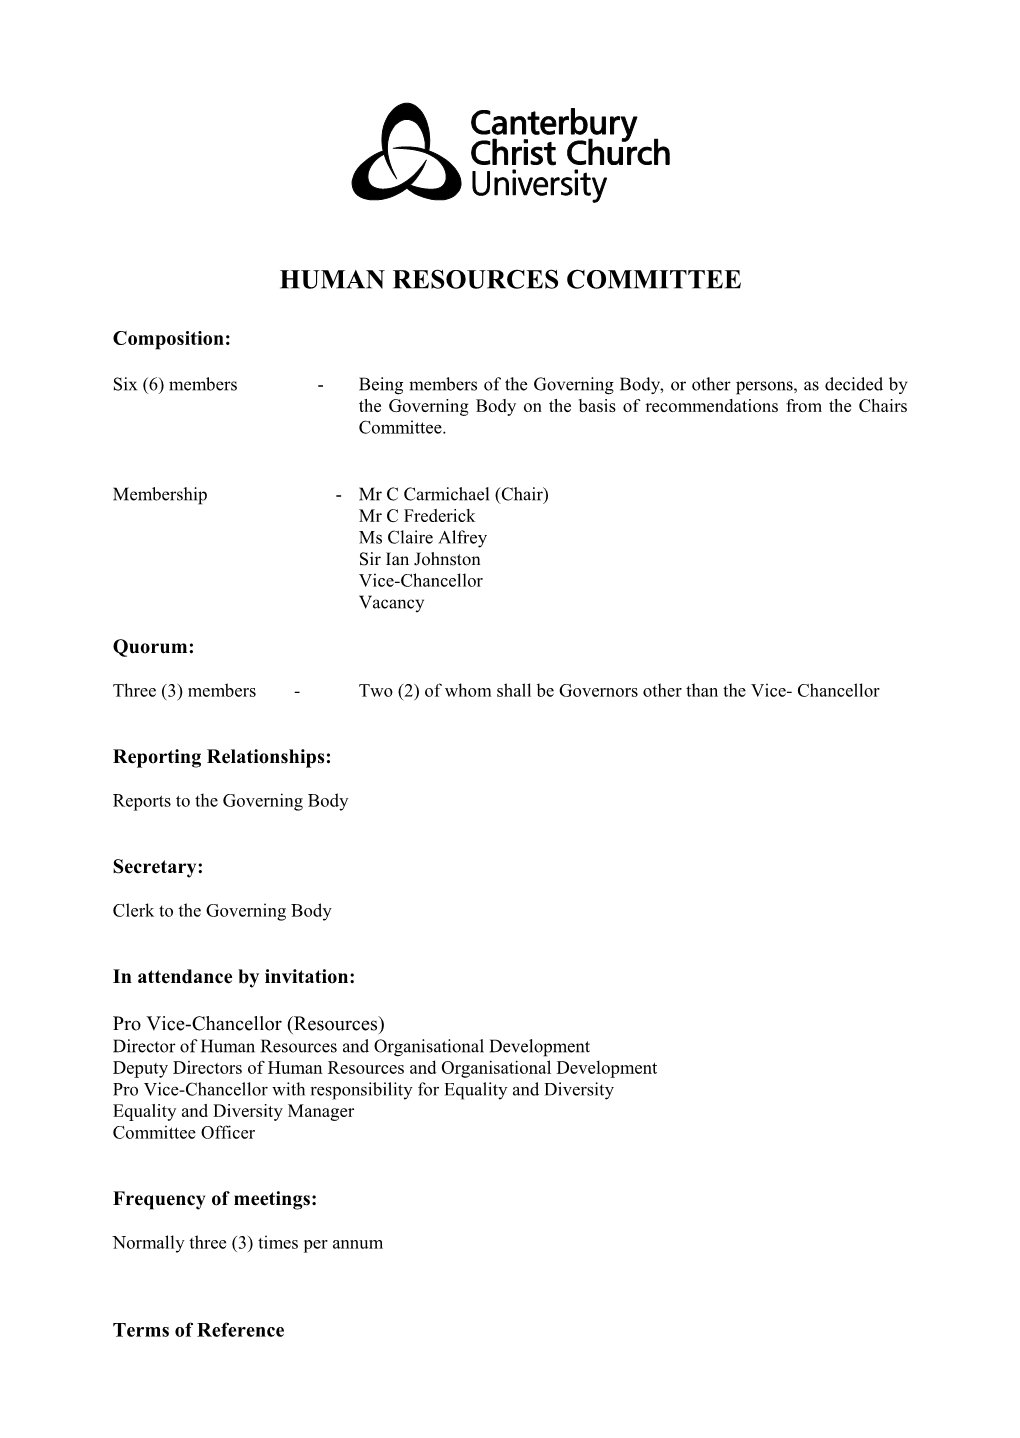 Human Resources Committee